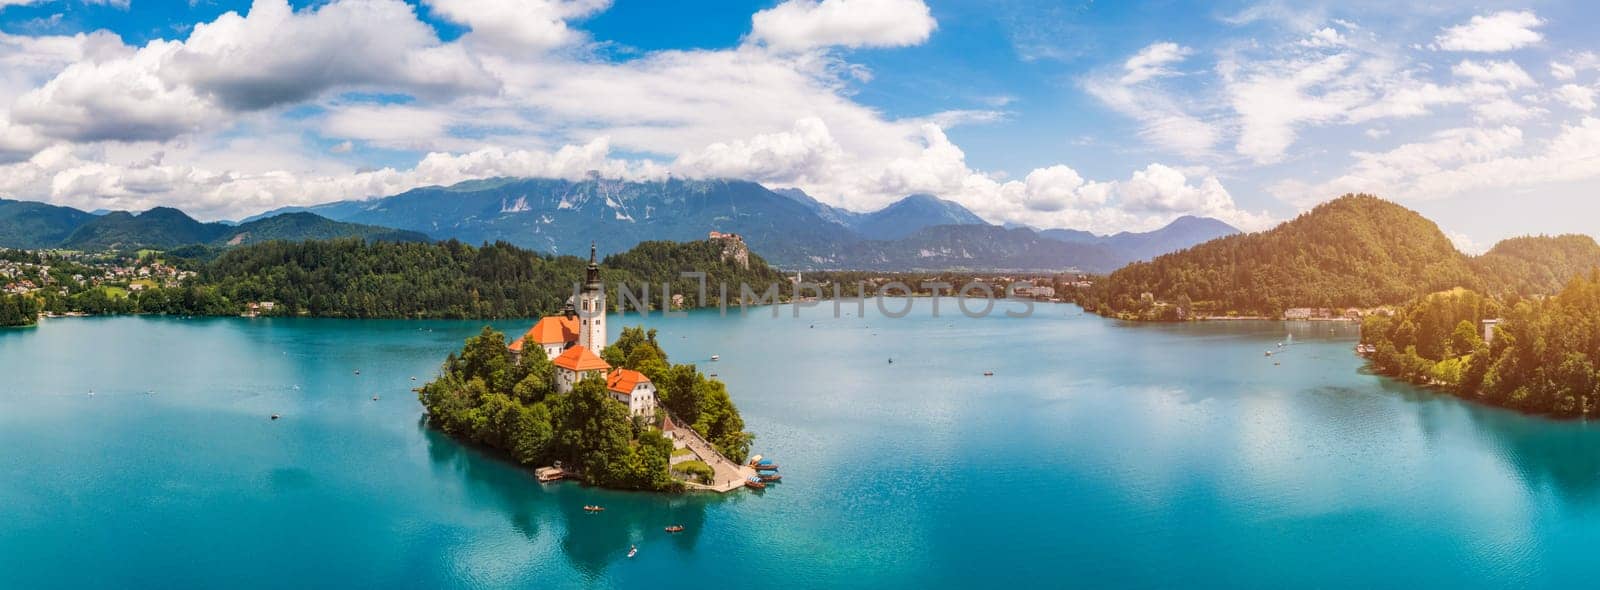 Lake Bled in Slovenia. Beautiful mountains and Bled lake with small Pilgrimage Church. Bled lake and island with Pilgrimage Church of the Assumption of Maria. Bled, Slovenia, Europe. by DaLiu